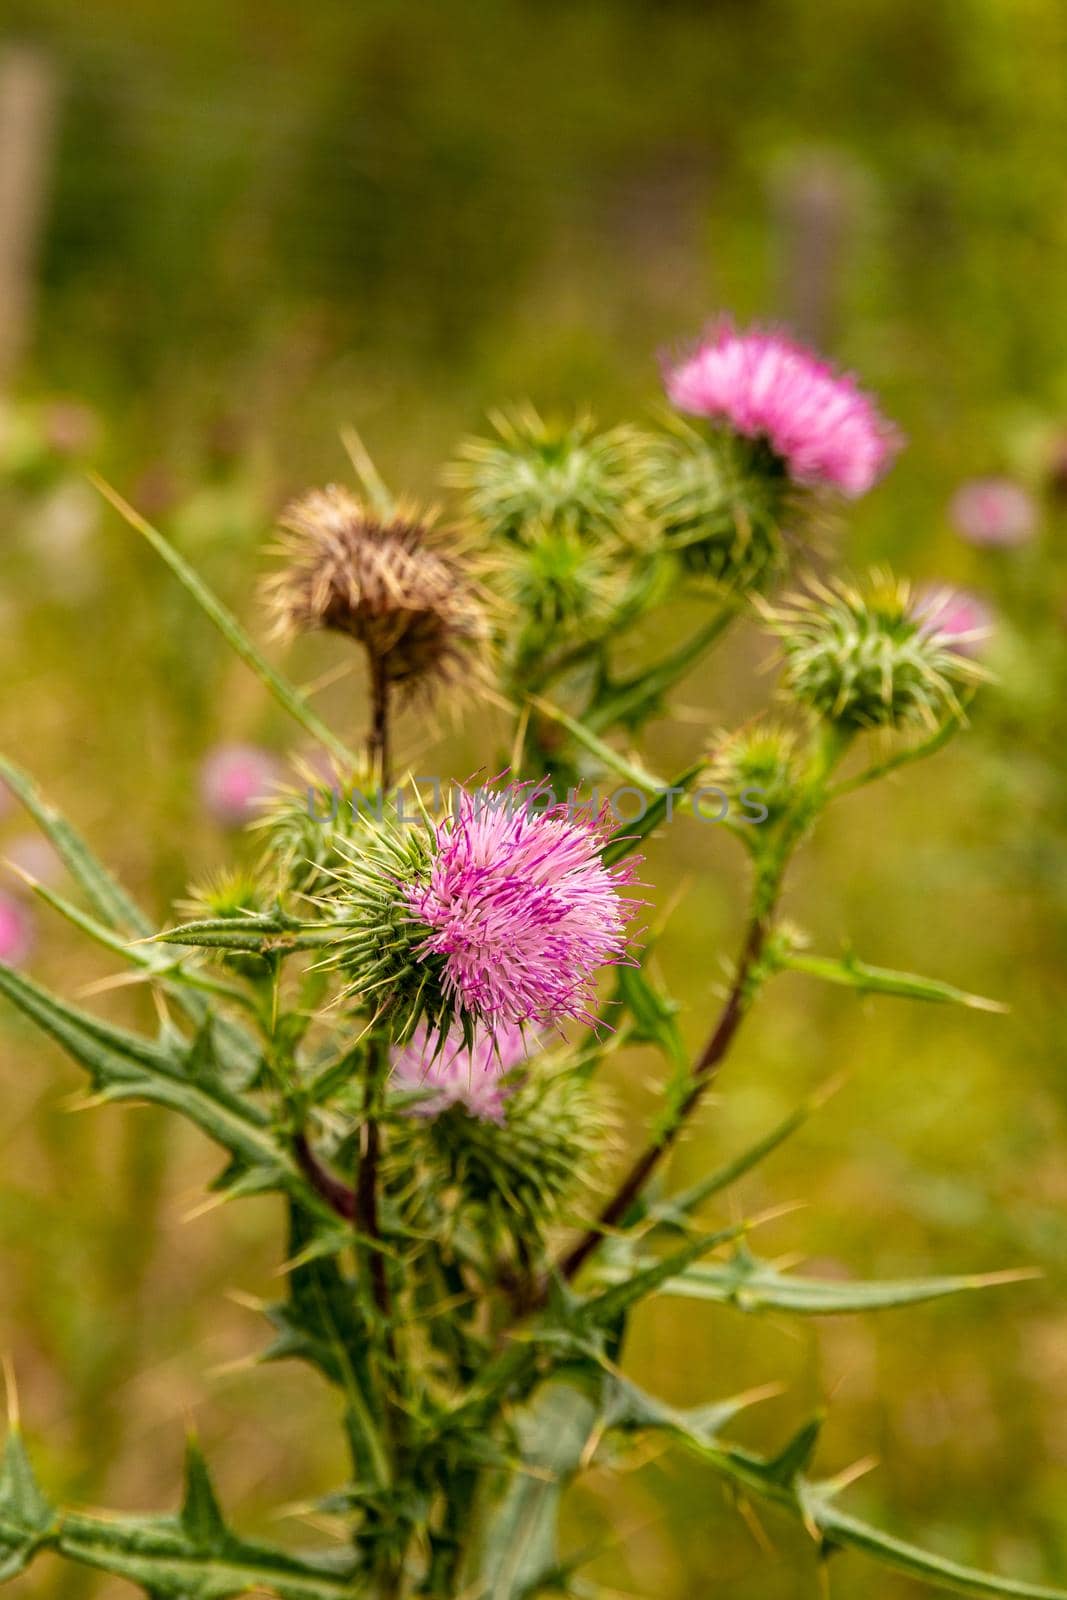 Detail of some pink thistle flowers in a branch against a blurry green background